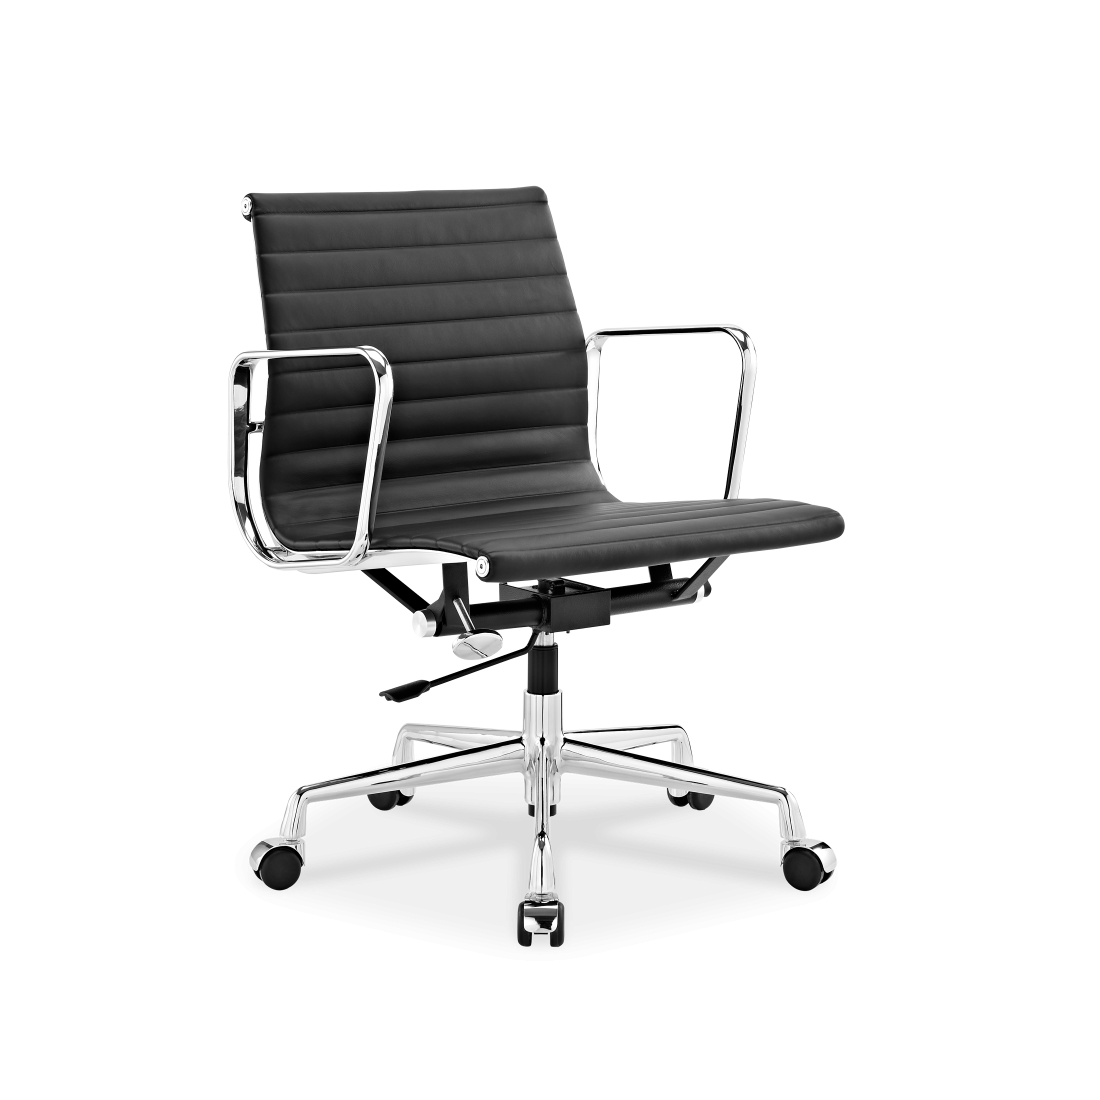 Place Furniture Replica Eames Office Chair Italian Leather Black 2 